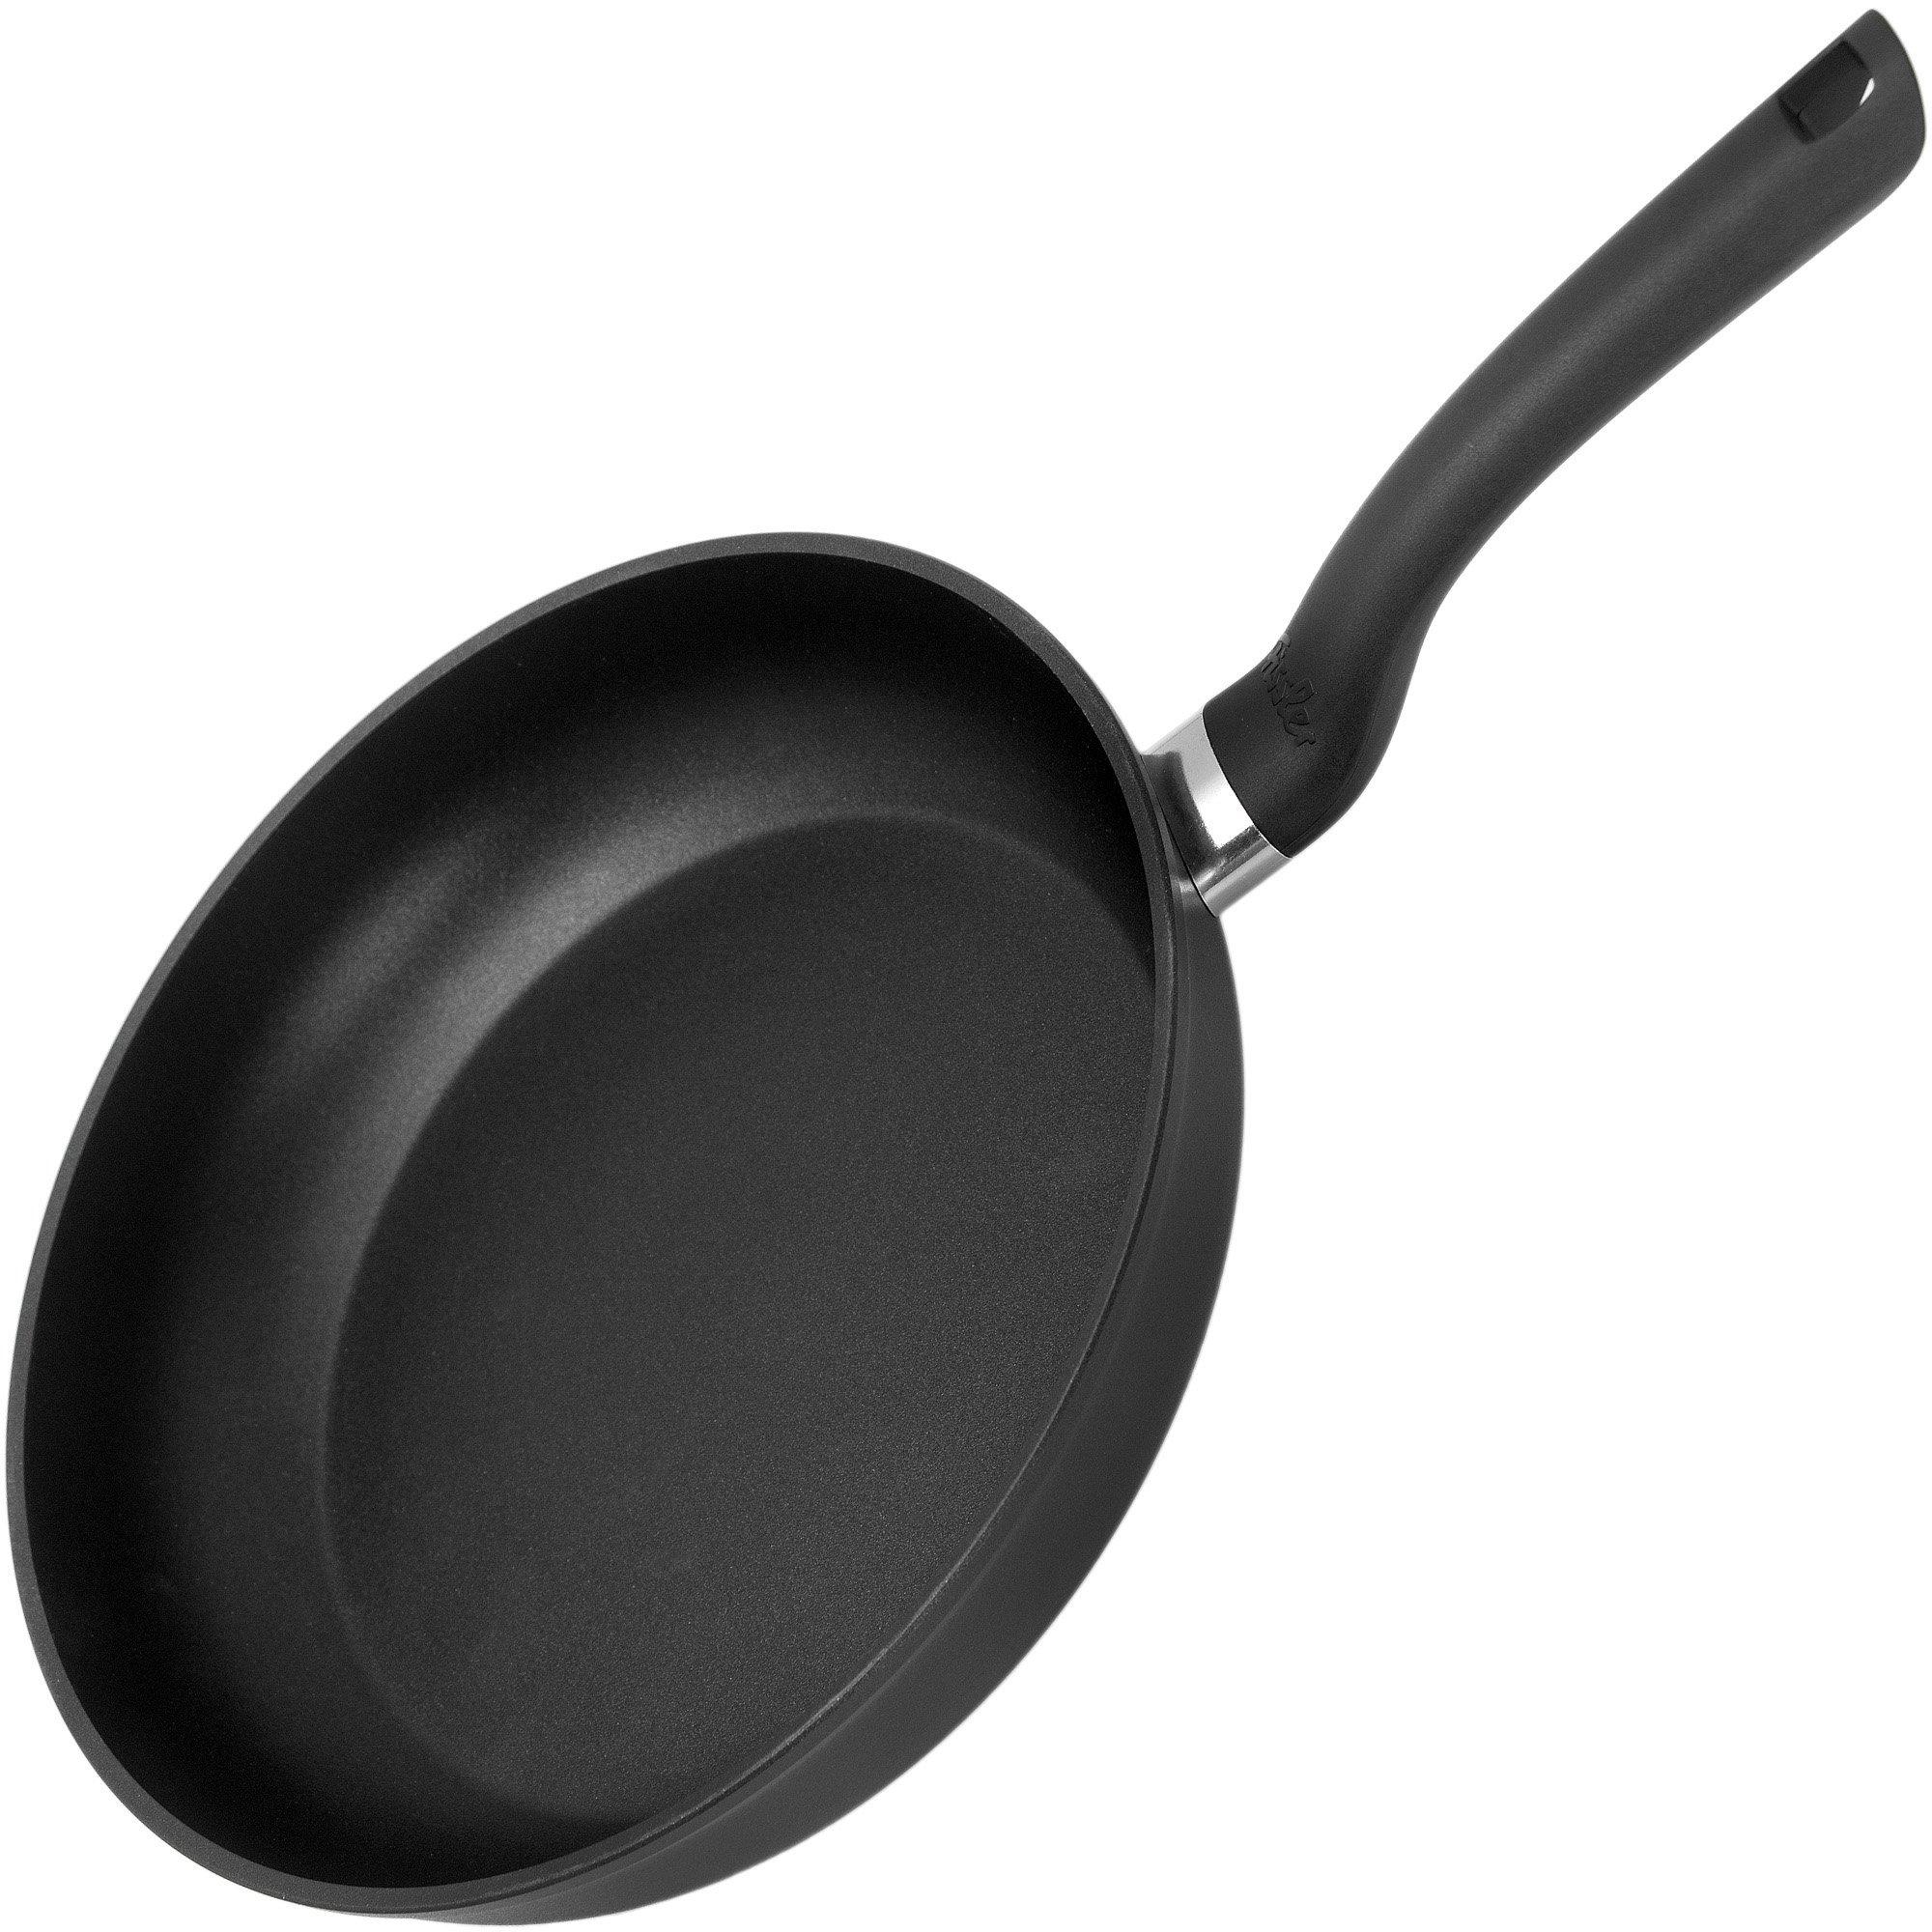 cm pan Cenit Fissler at frying shopping 045-301-28-100, Induction 28 Advantageously |